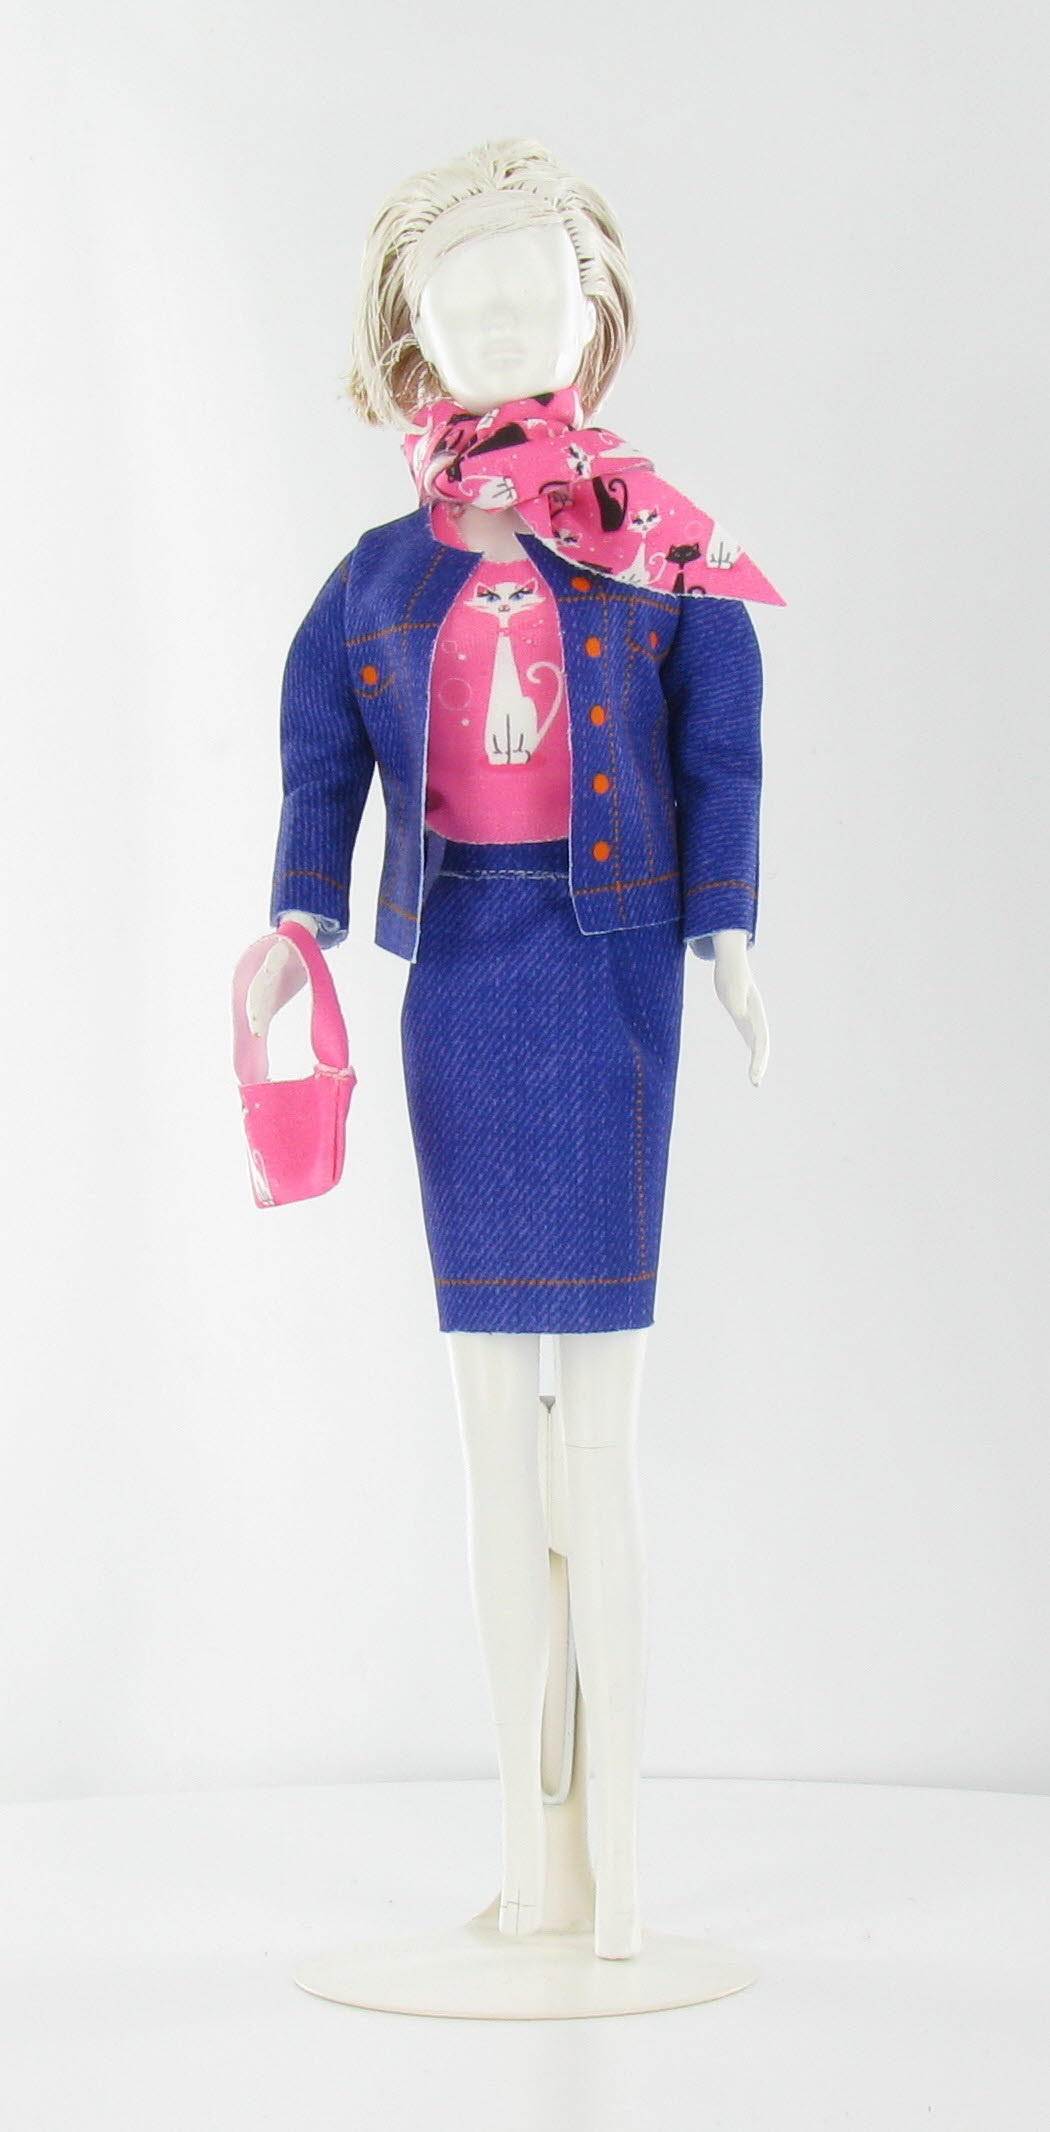 Dress Your Doll - Jacky Cat & Jeans